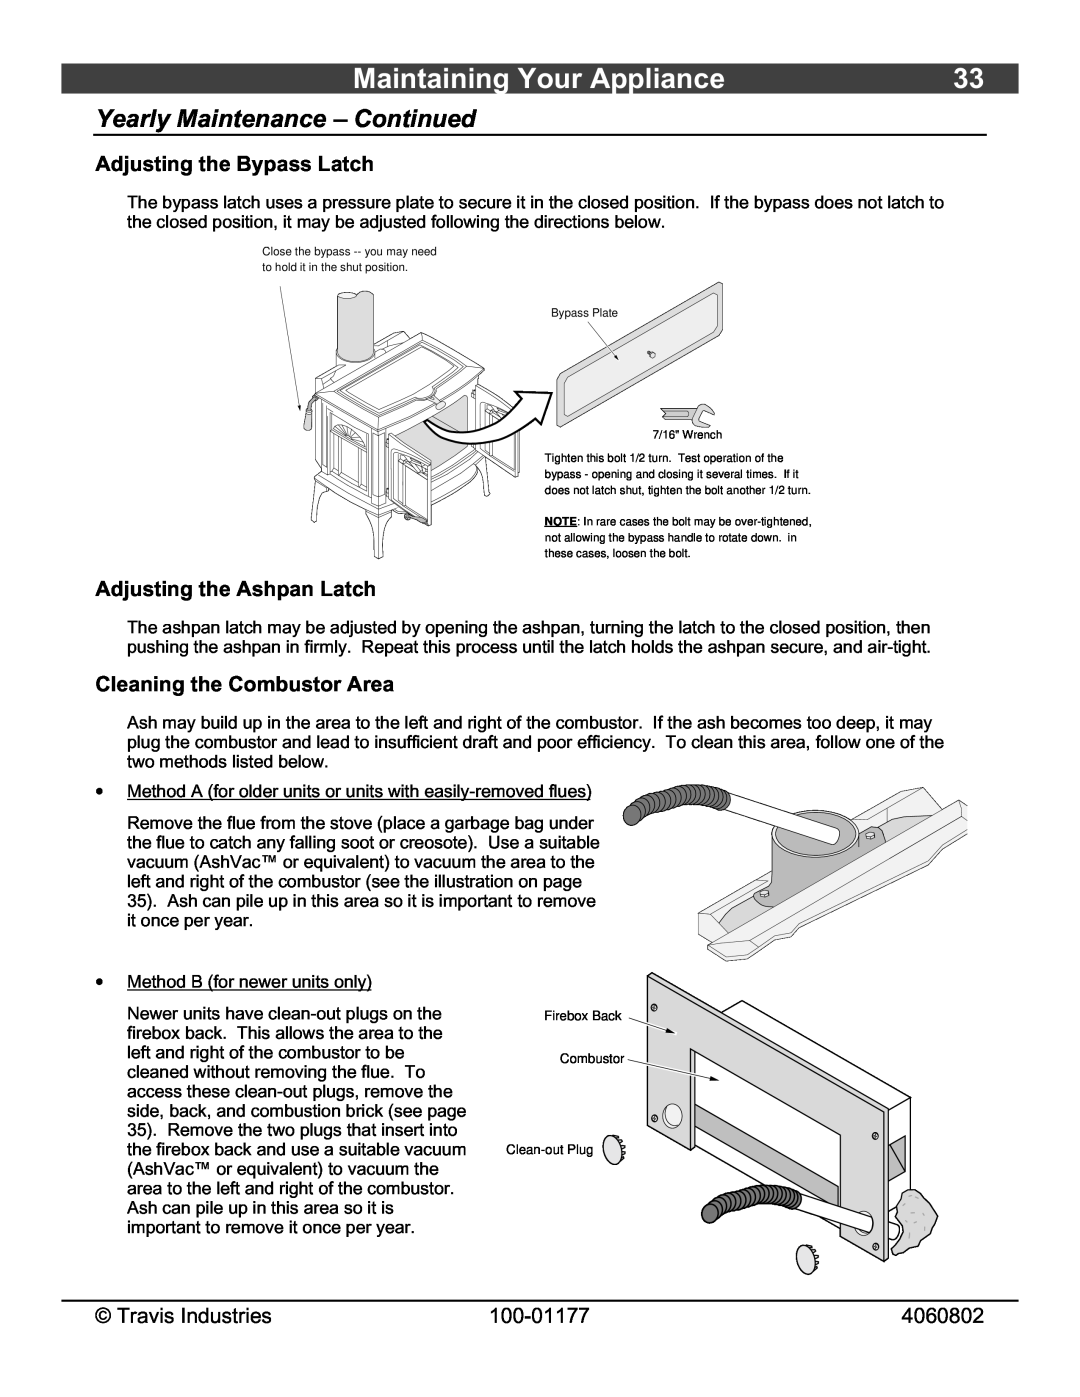 Lopi 028-S-75-2 owner manual Maintaining Your Appliance, Yearly Maintenance - Continued, Adjusting the Bypass Latch 